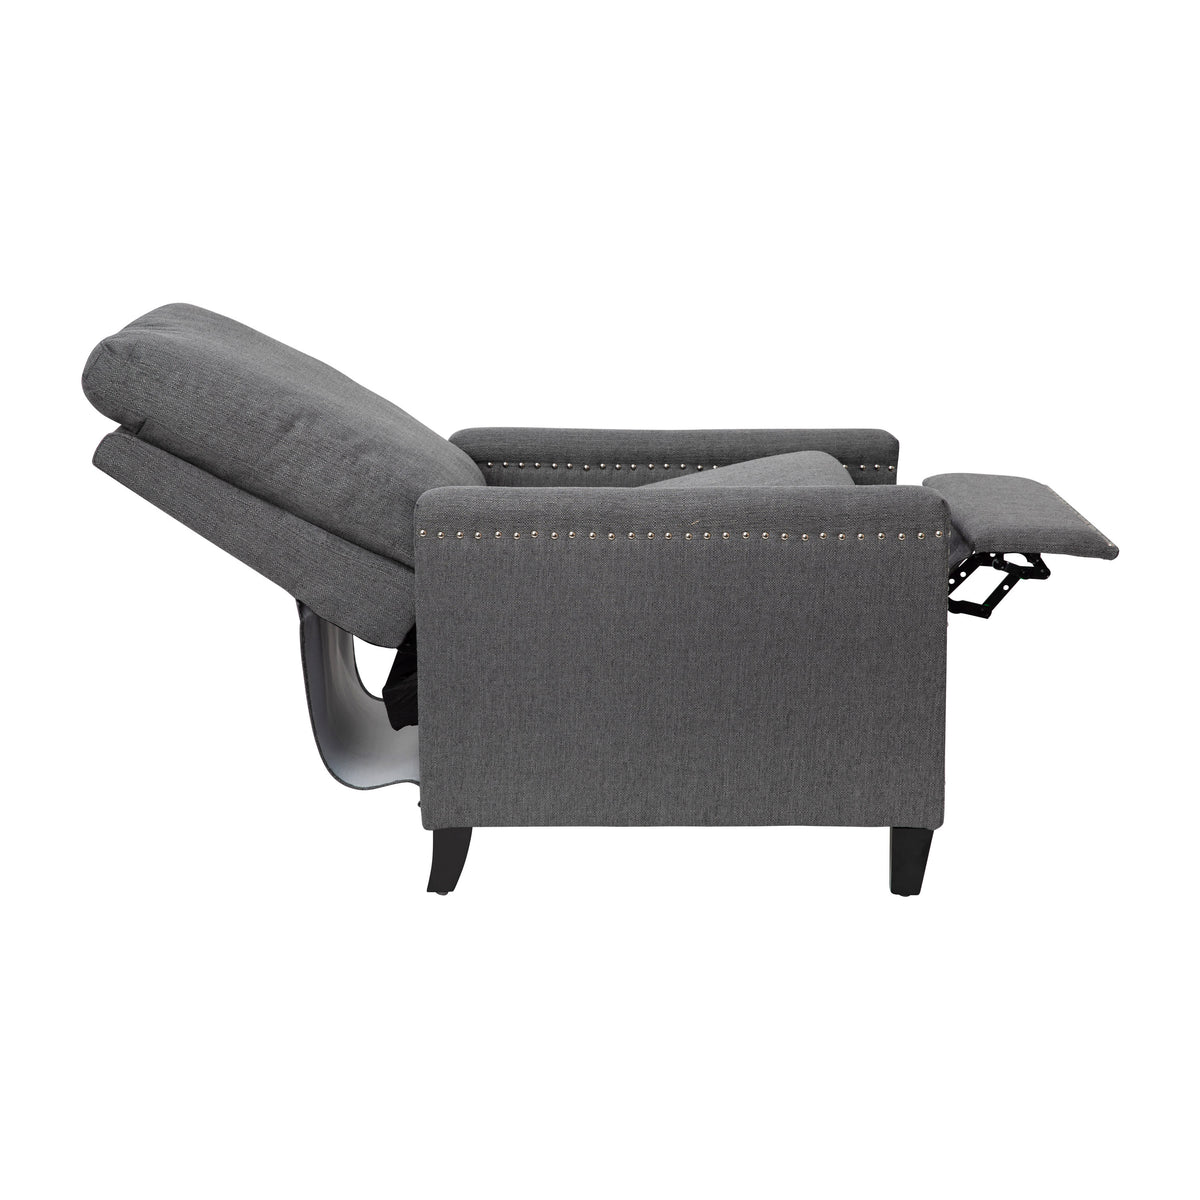 Gray |#| Push Back Recliner with Pillow Style Backrest and Accent Nail Trim - Gray